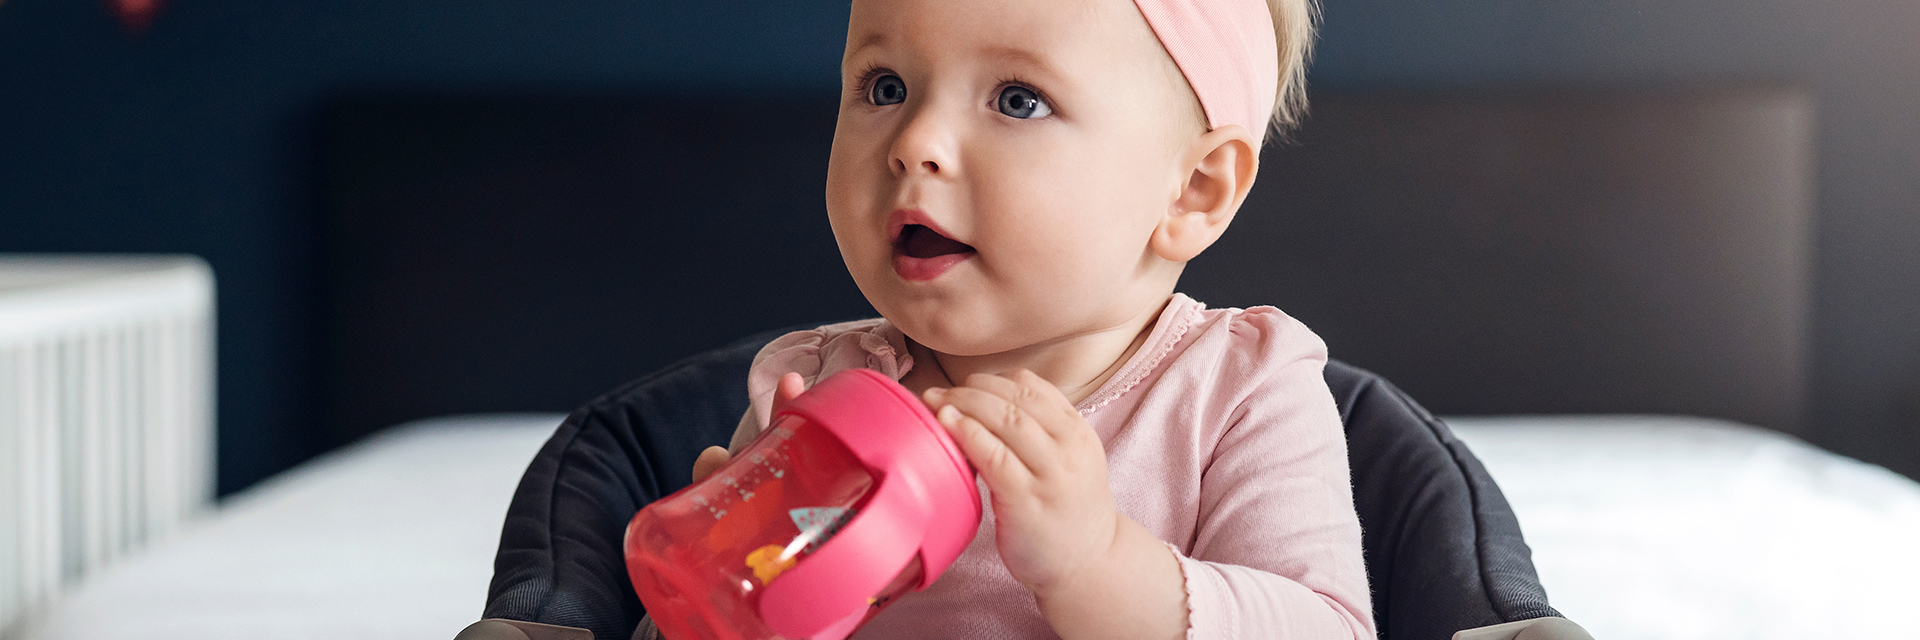 Little girl holding sippy cup